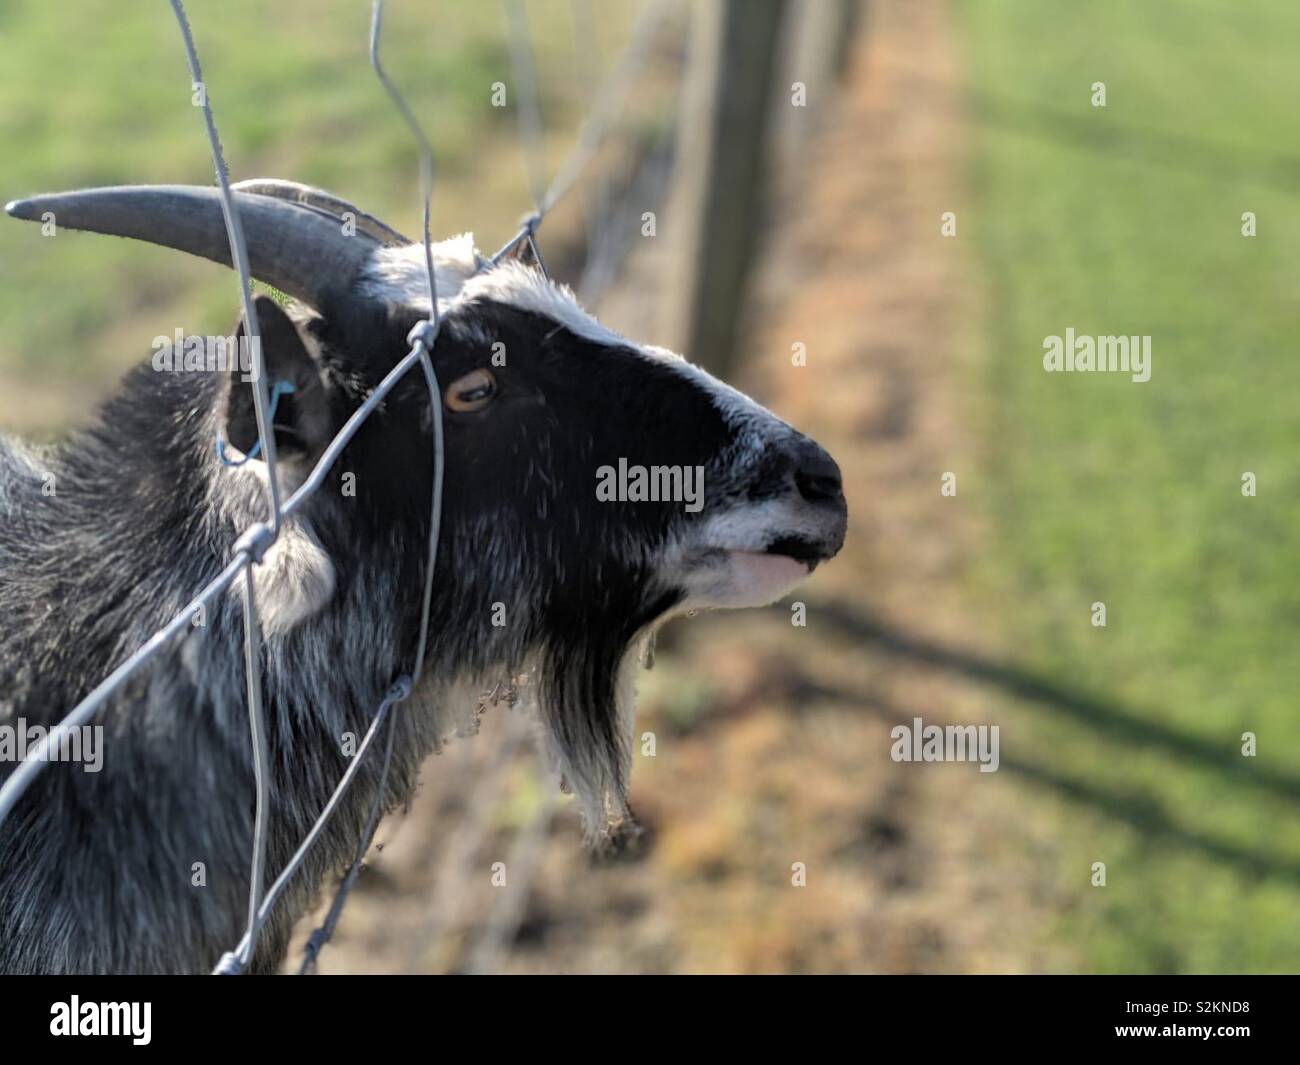 Goat popping his head out of a fence Stock Photo